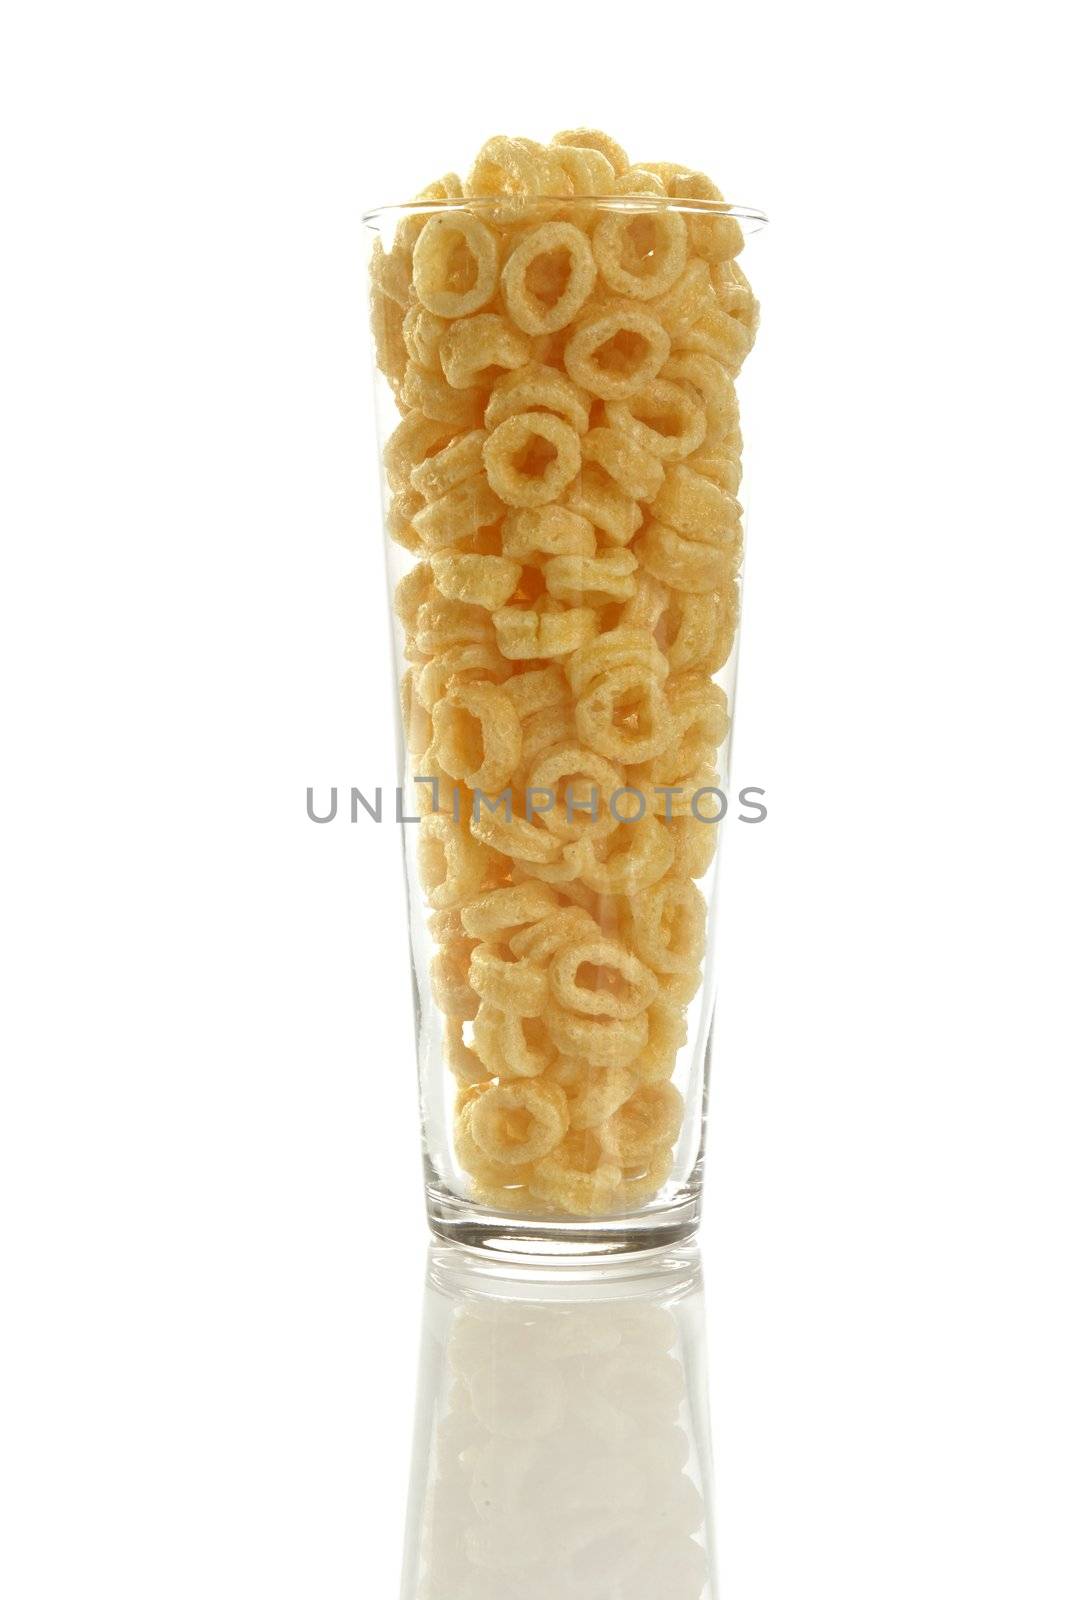 Corn round ring snacks in a vertical high glass over white